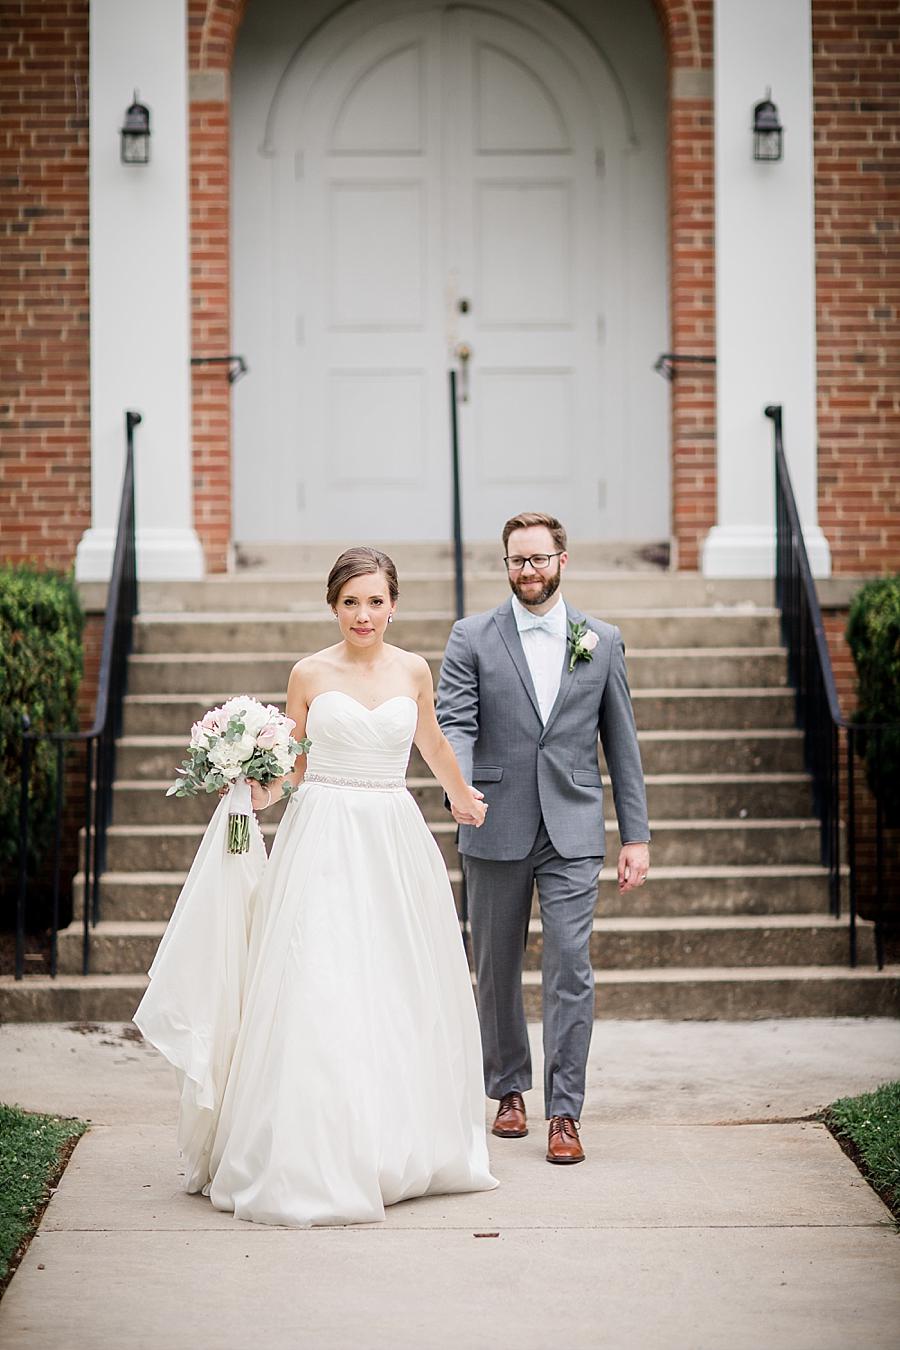 Leading her groom at this Fountain City Church Wedding by Knoxville Wedding Photographer, Amanda May Photos.